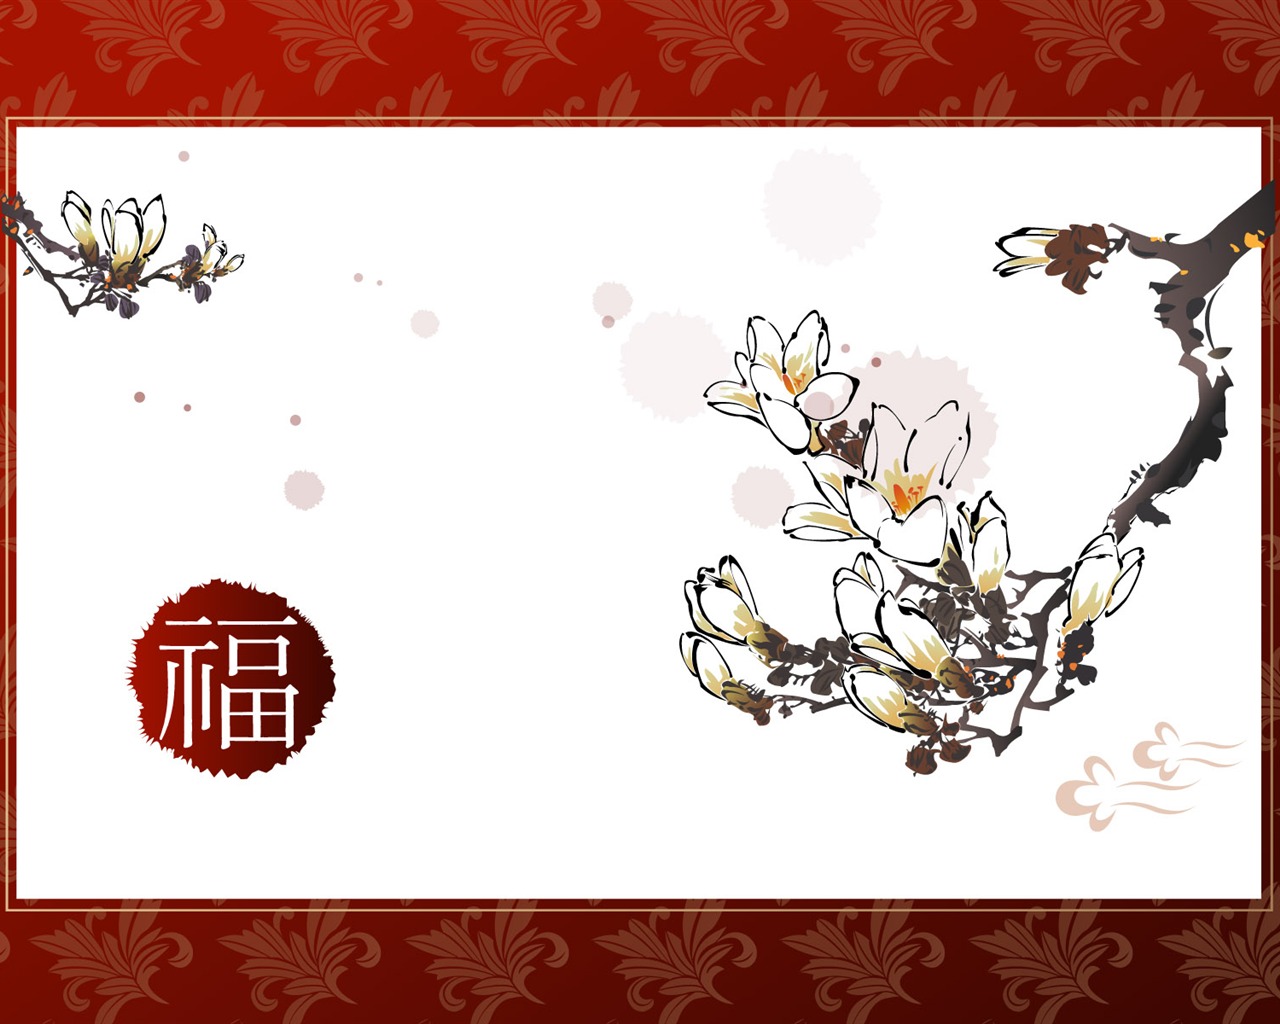 New Year's special edition of Wallpaper (2) #2 - 1280x1024